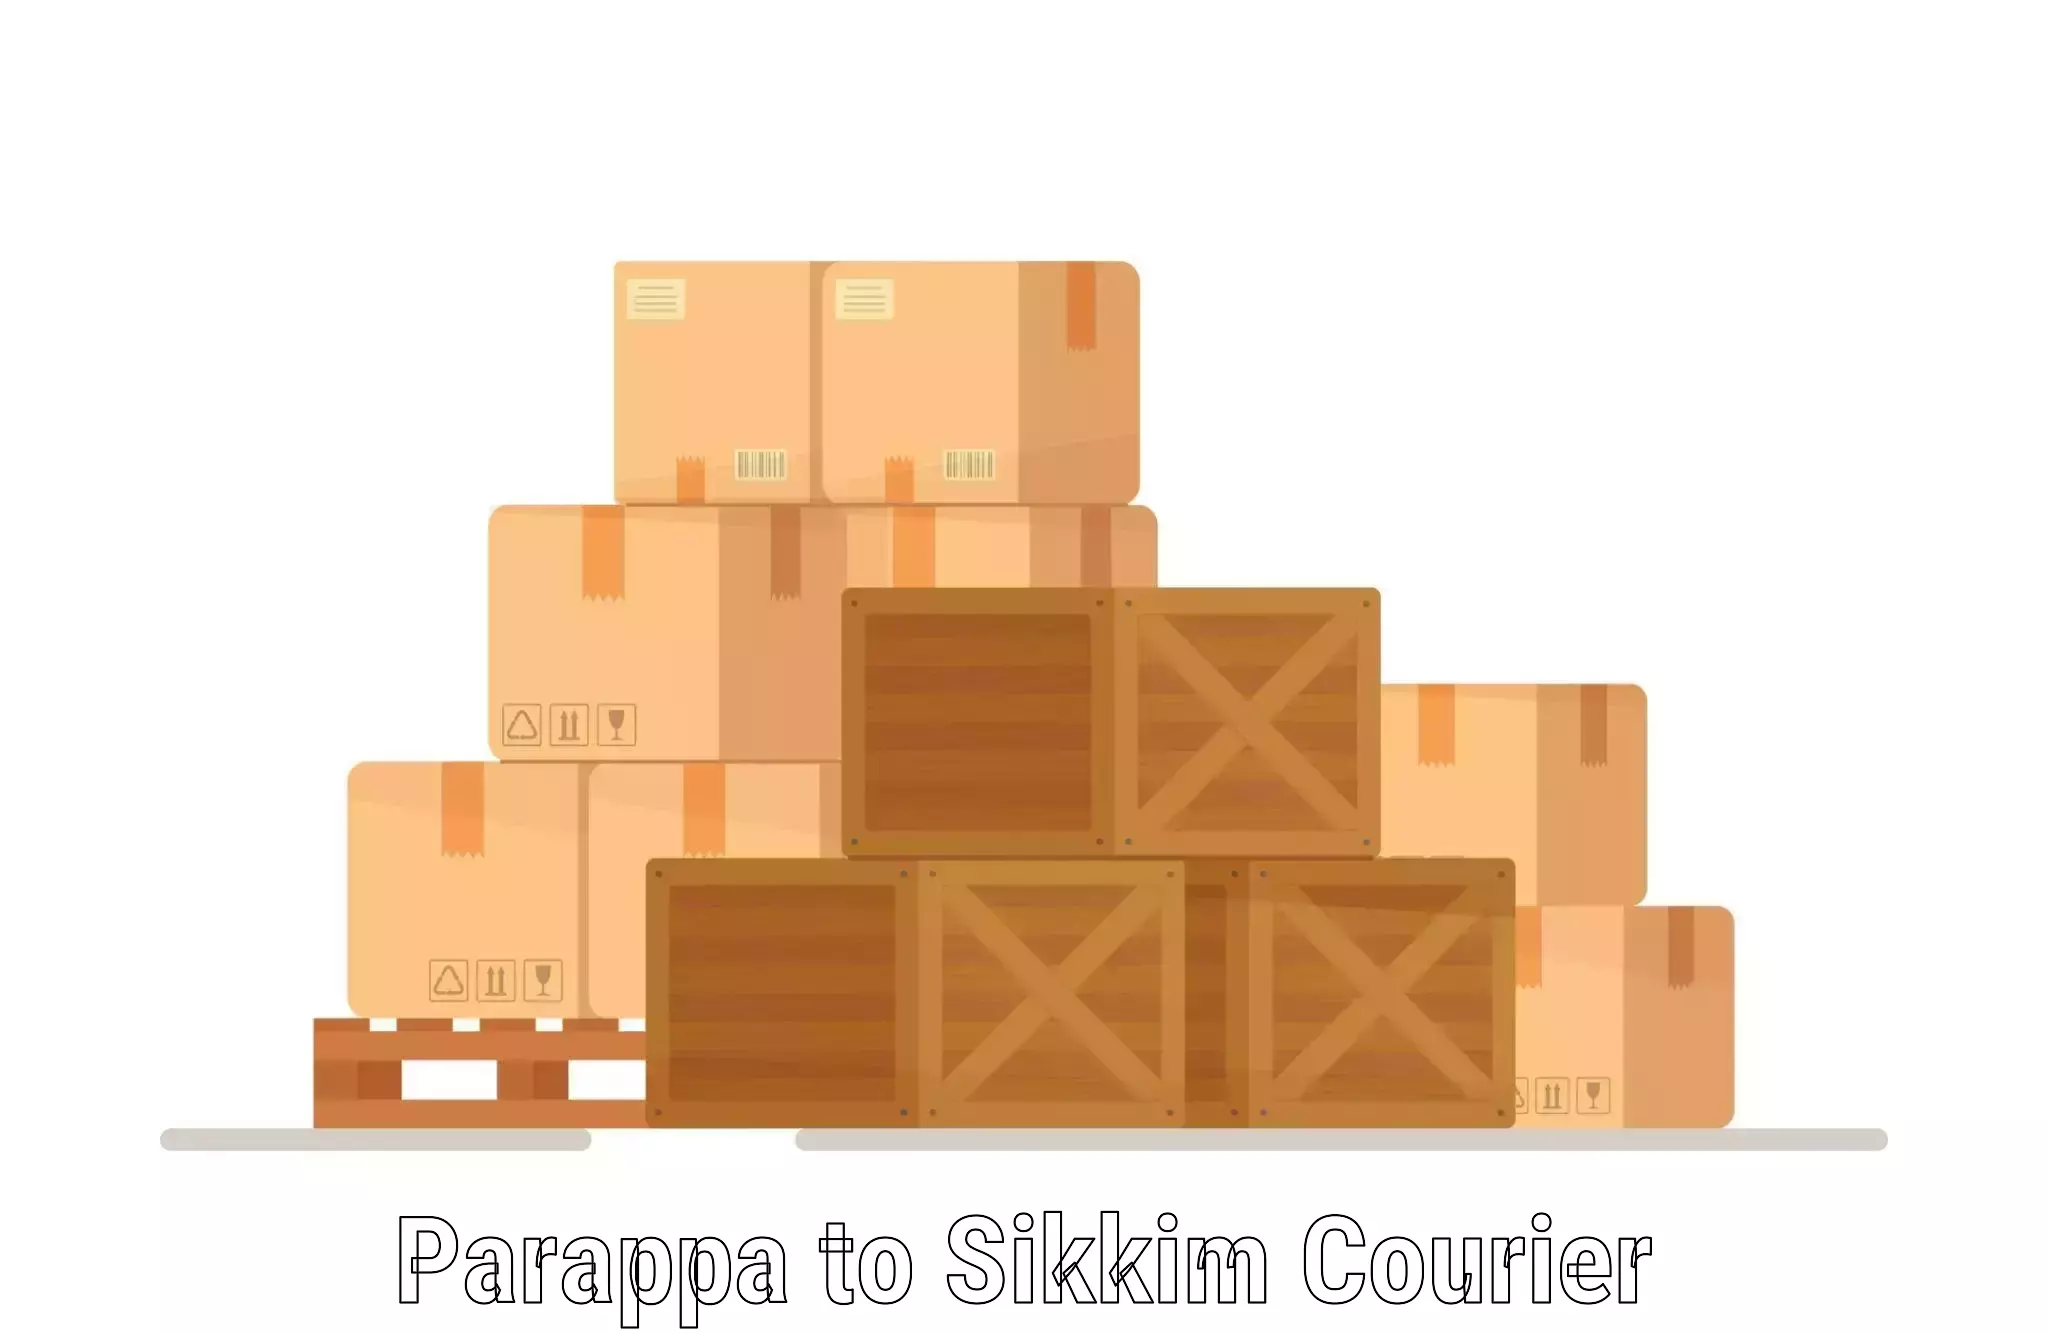 Ocean freight courier Parappa to Pelling